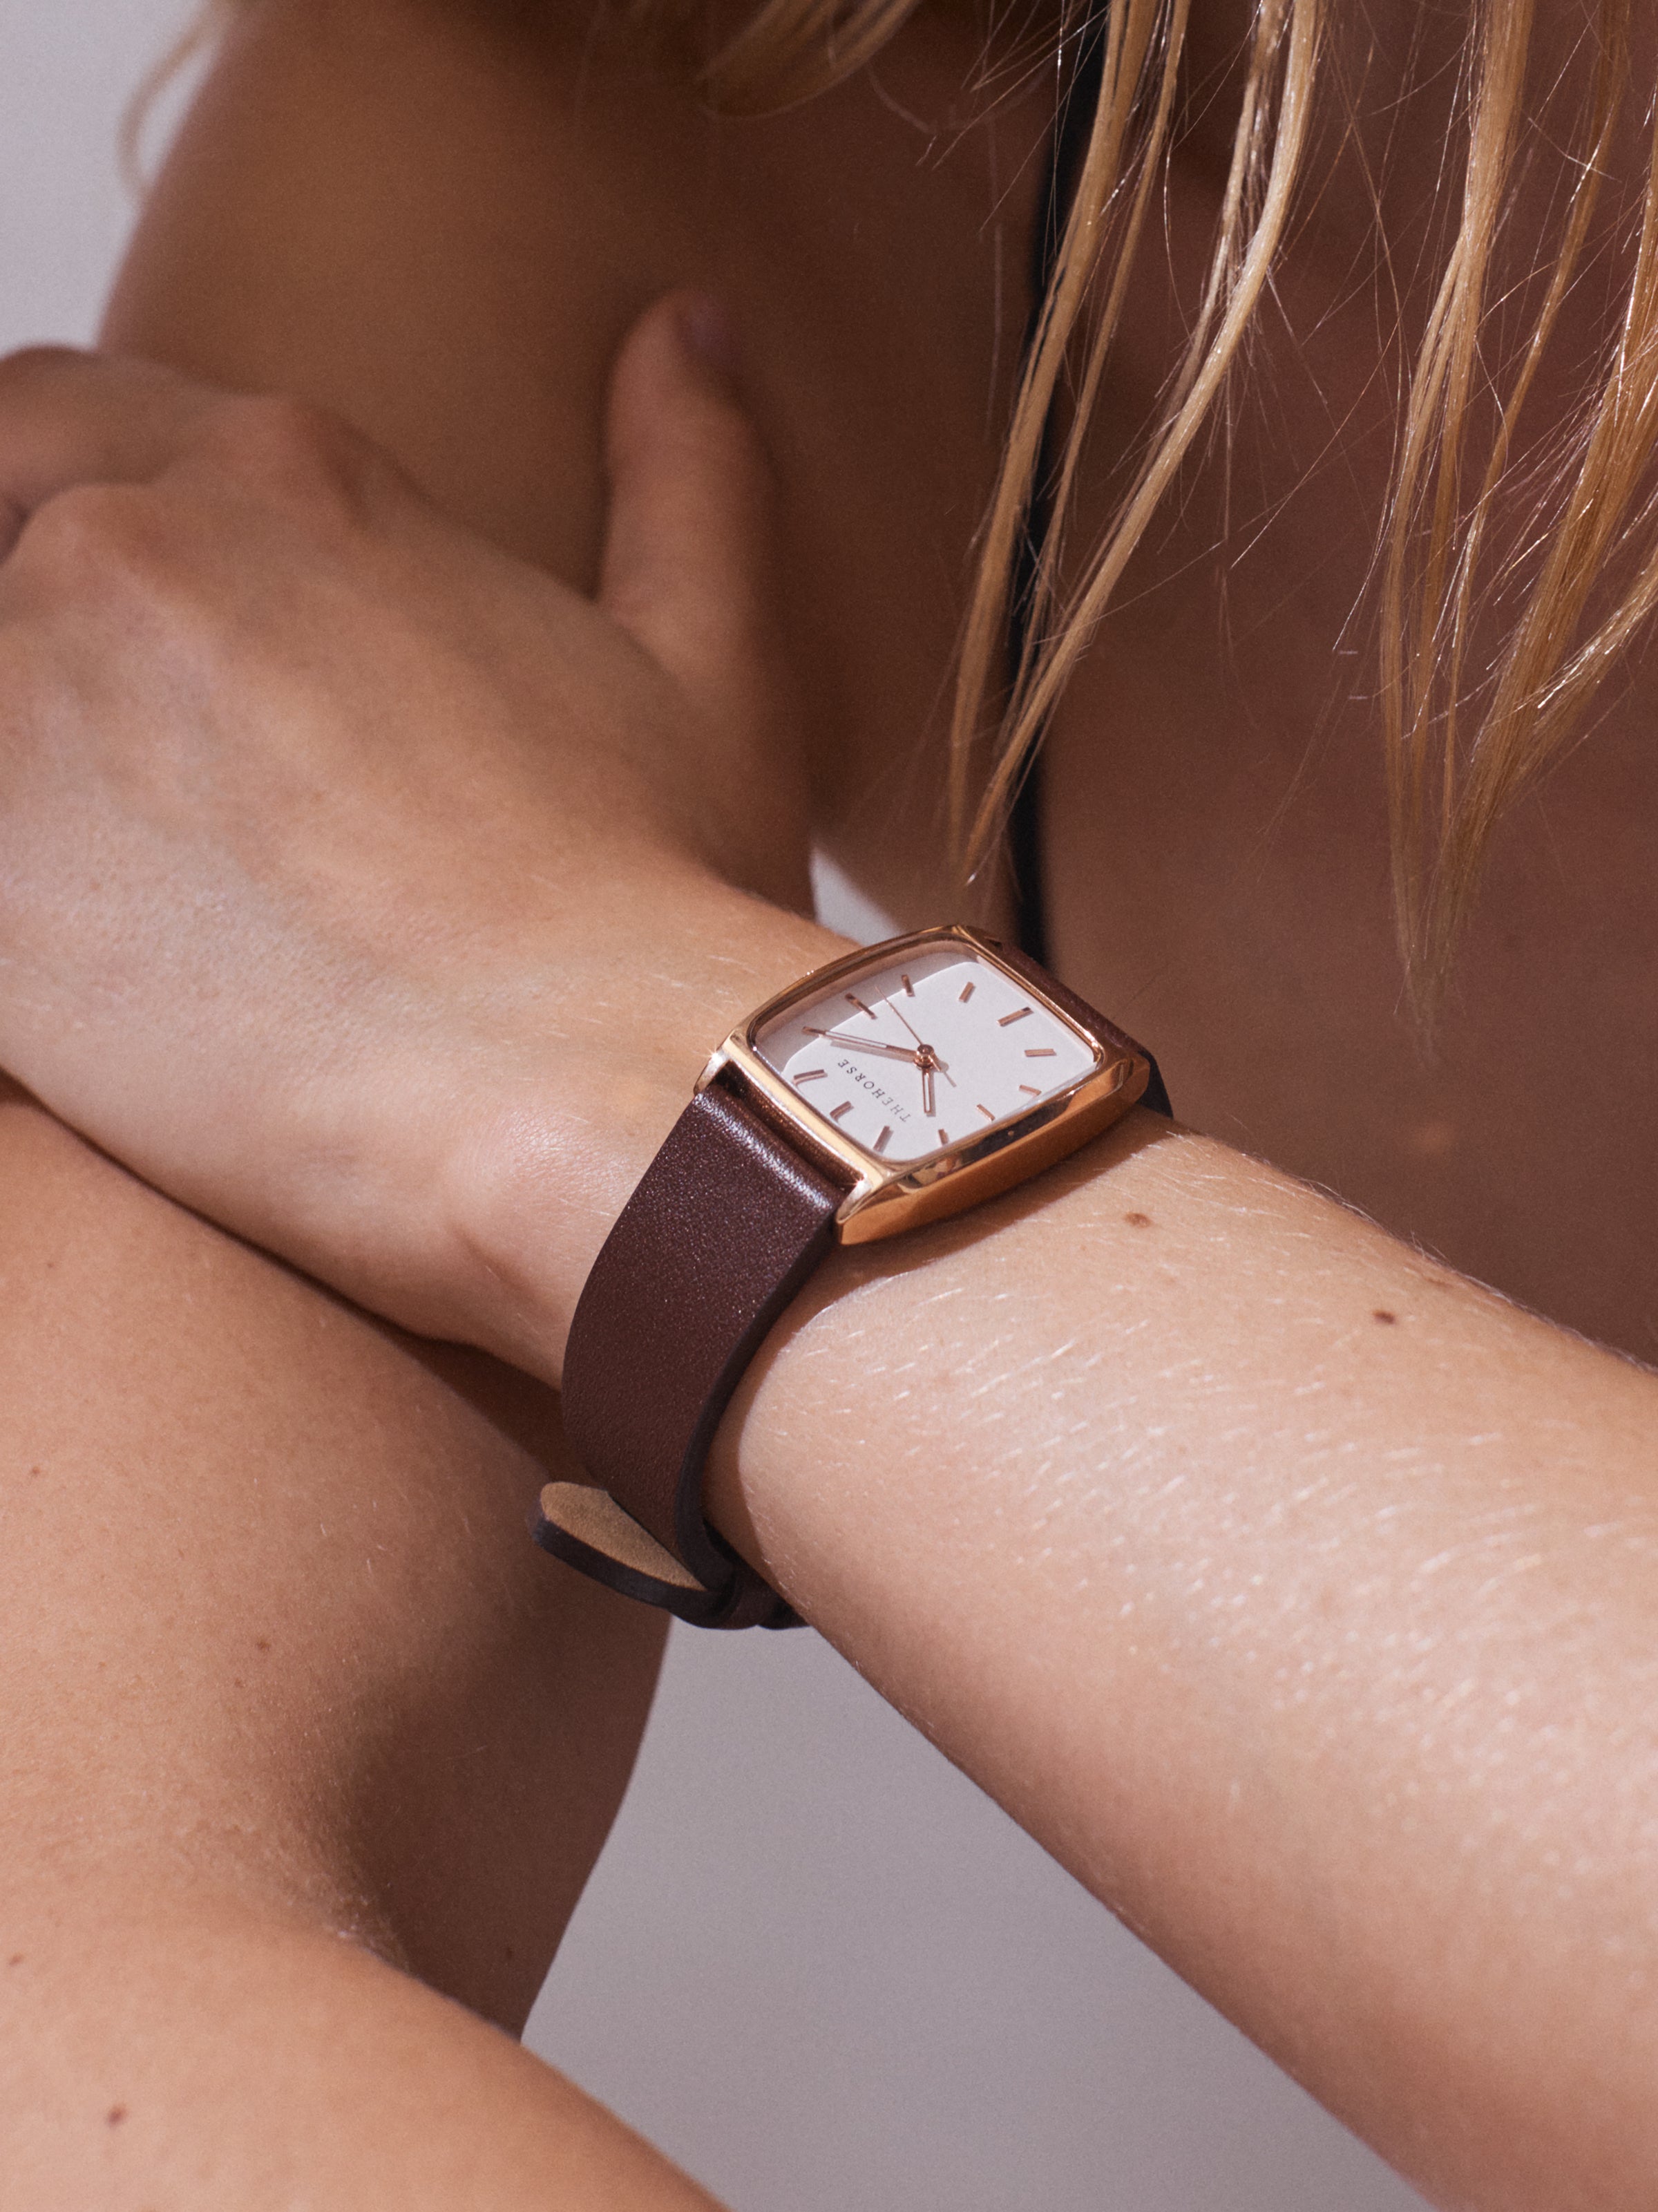 The Dress Watch: Rose Gold / White Dial / Coffee Leather